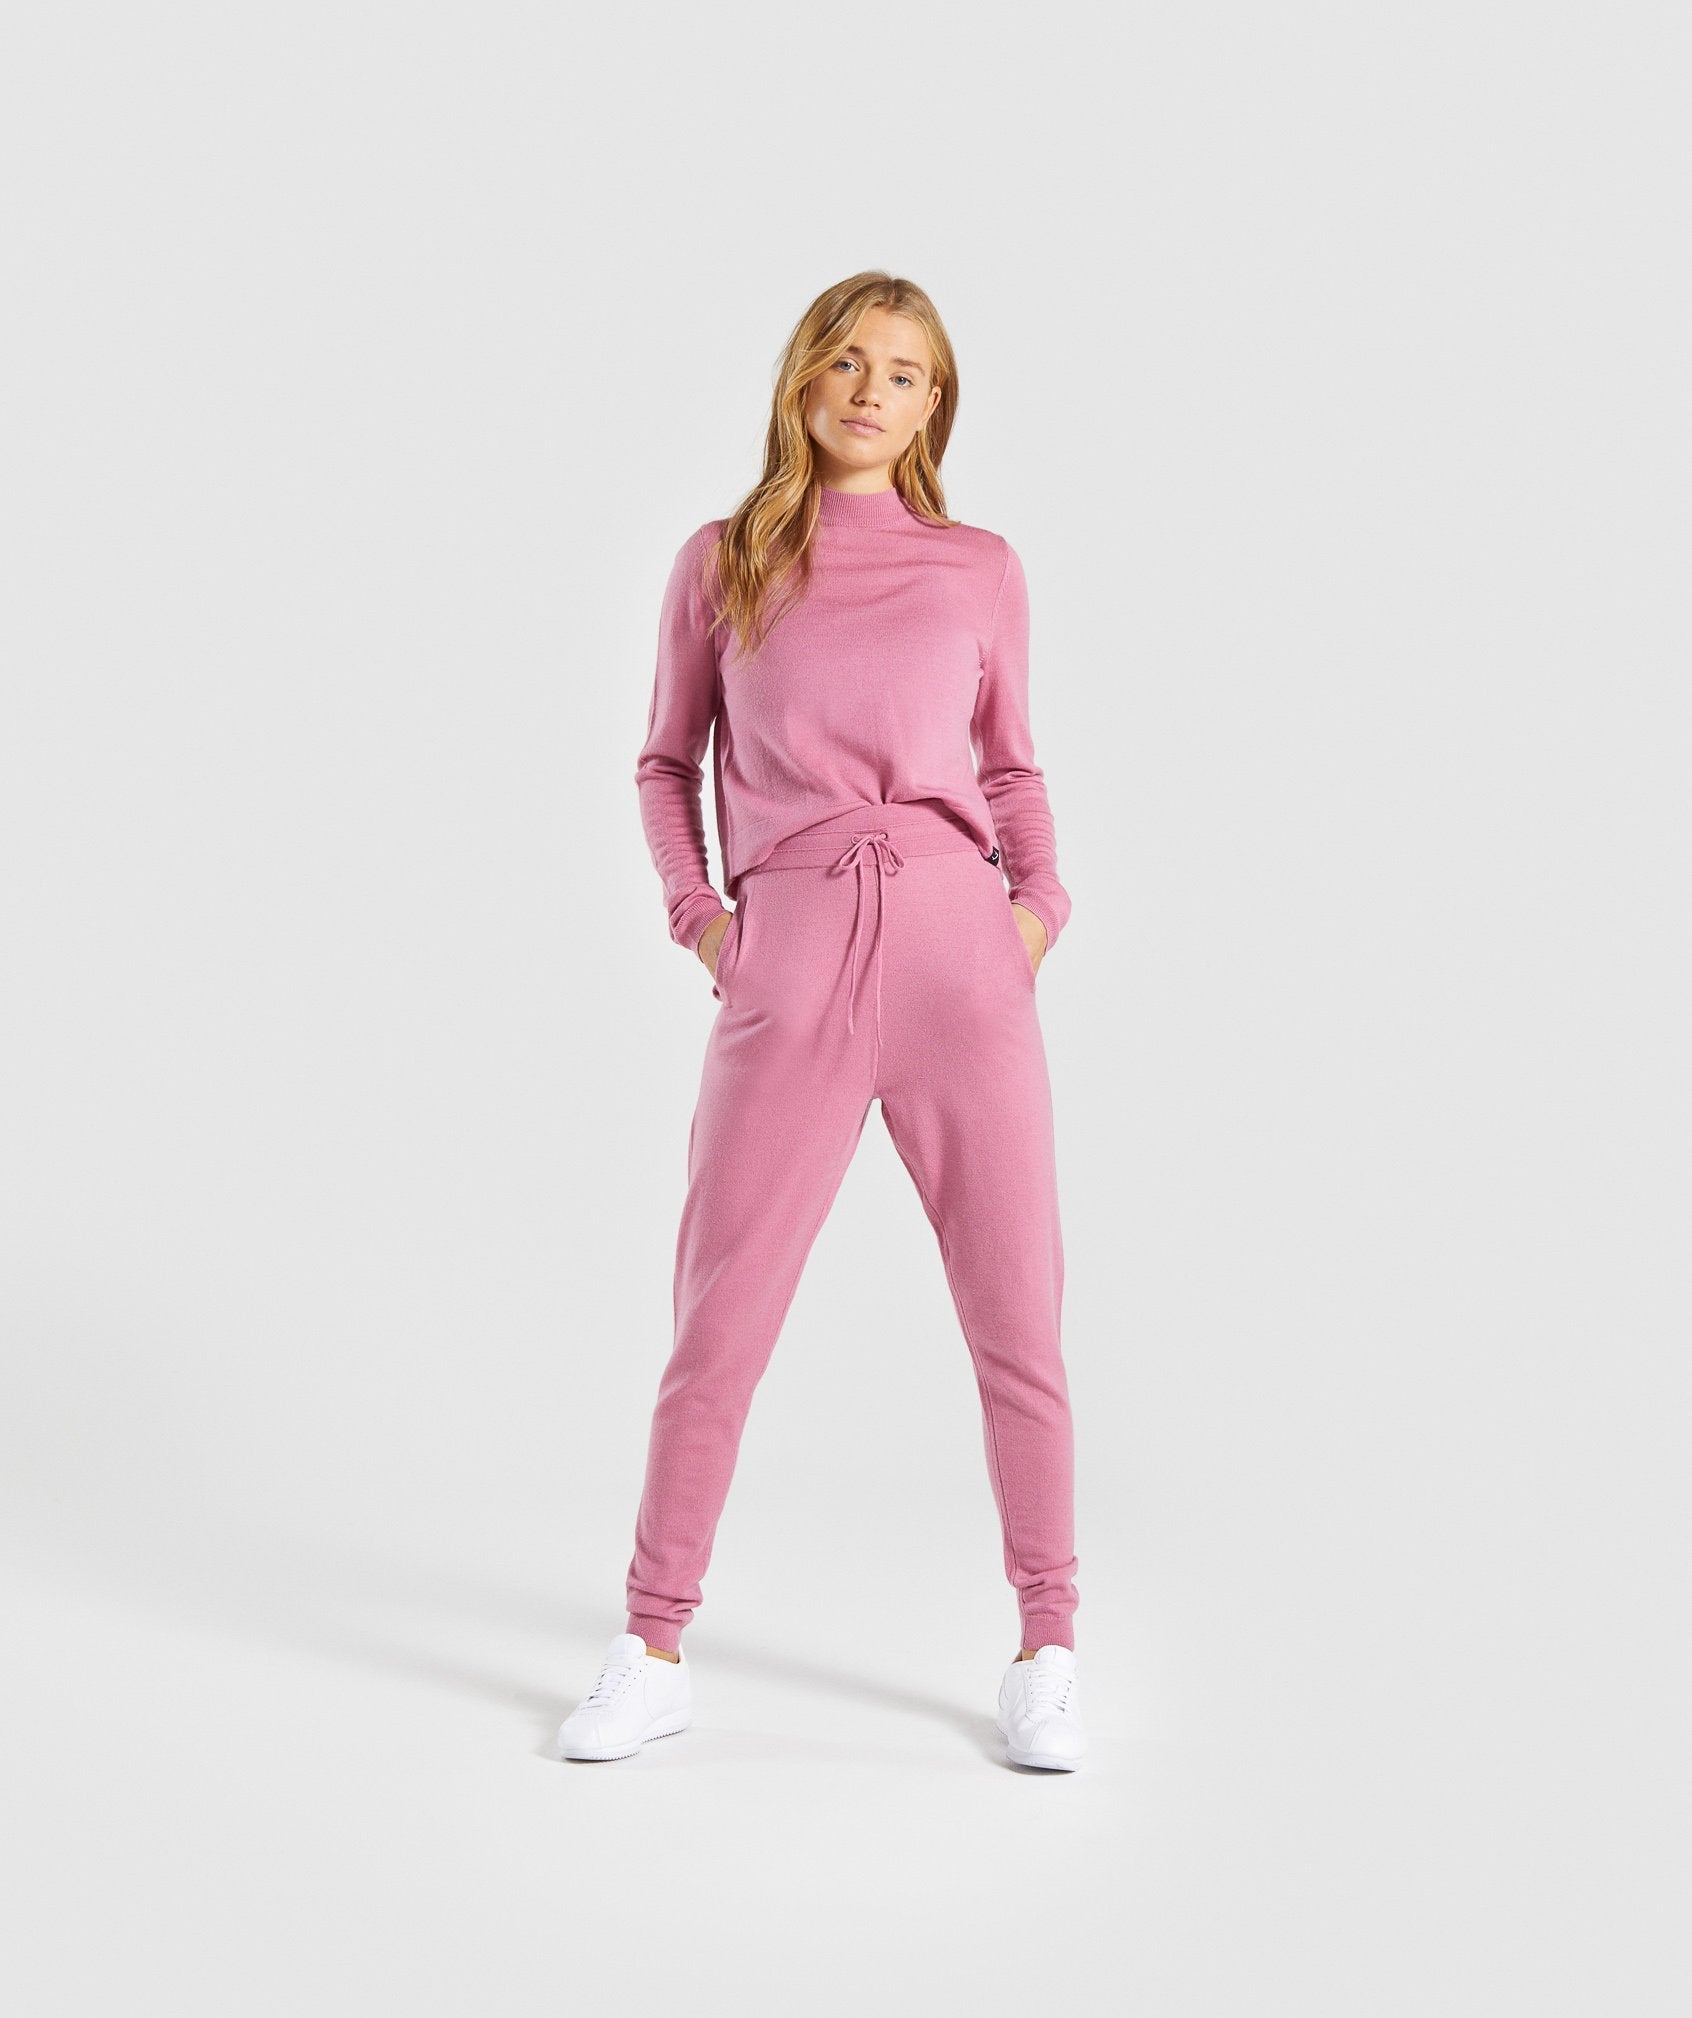 Isla Knit Jogger in  Dusky Pink - view 3